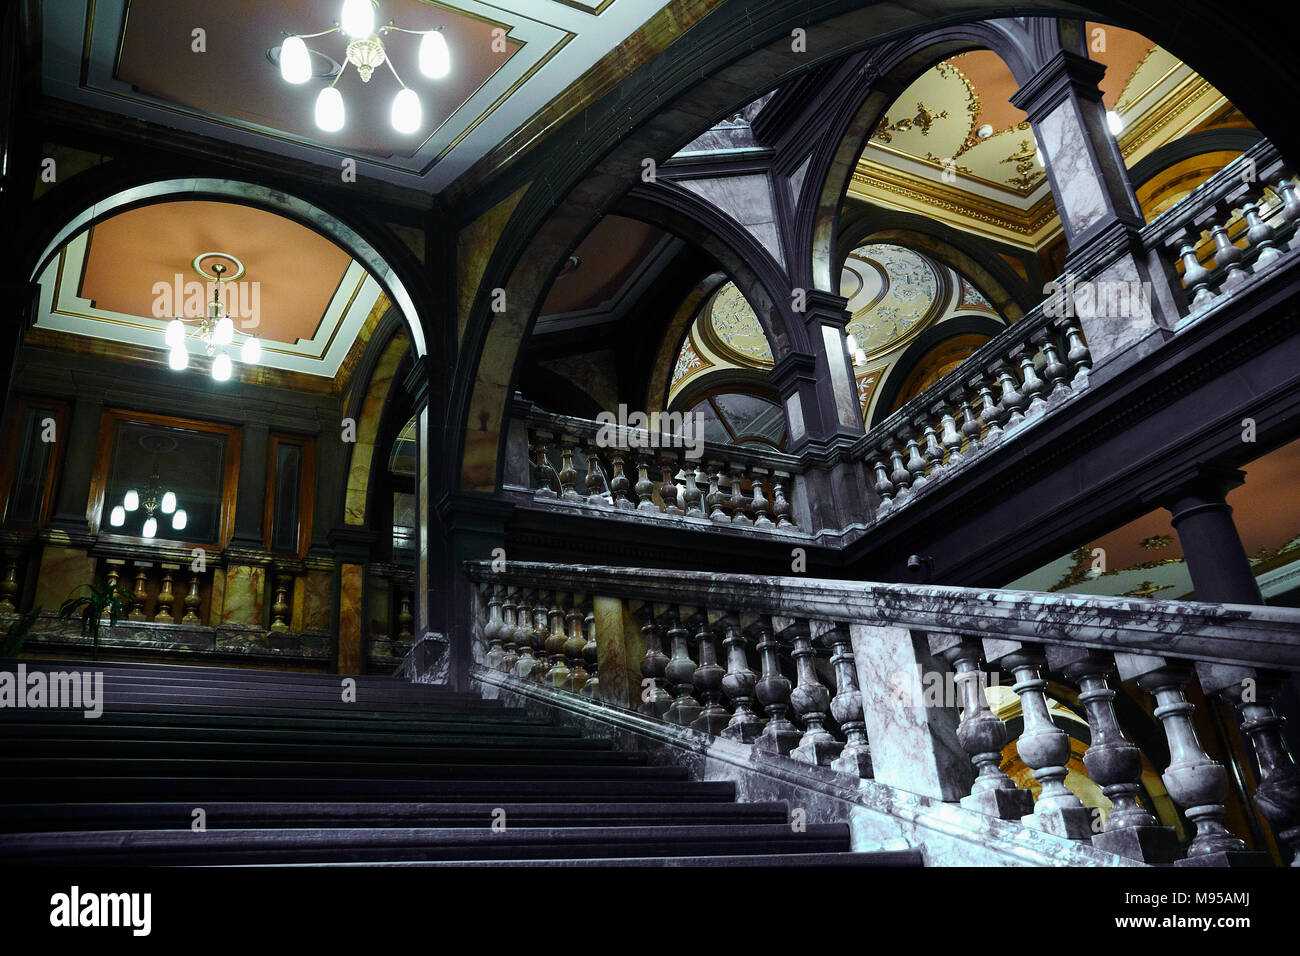 Glasgow City Chambers Marble Staircase Entrance Stock Photo